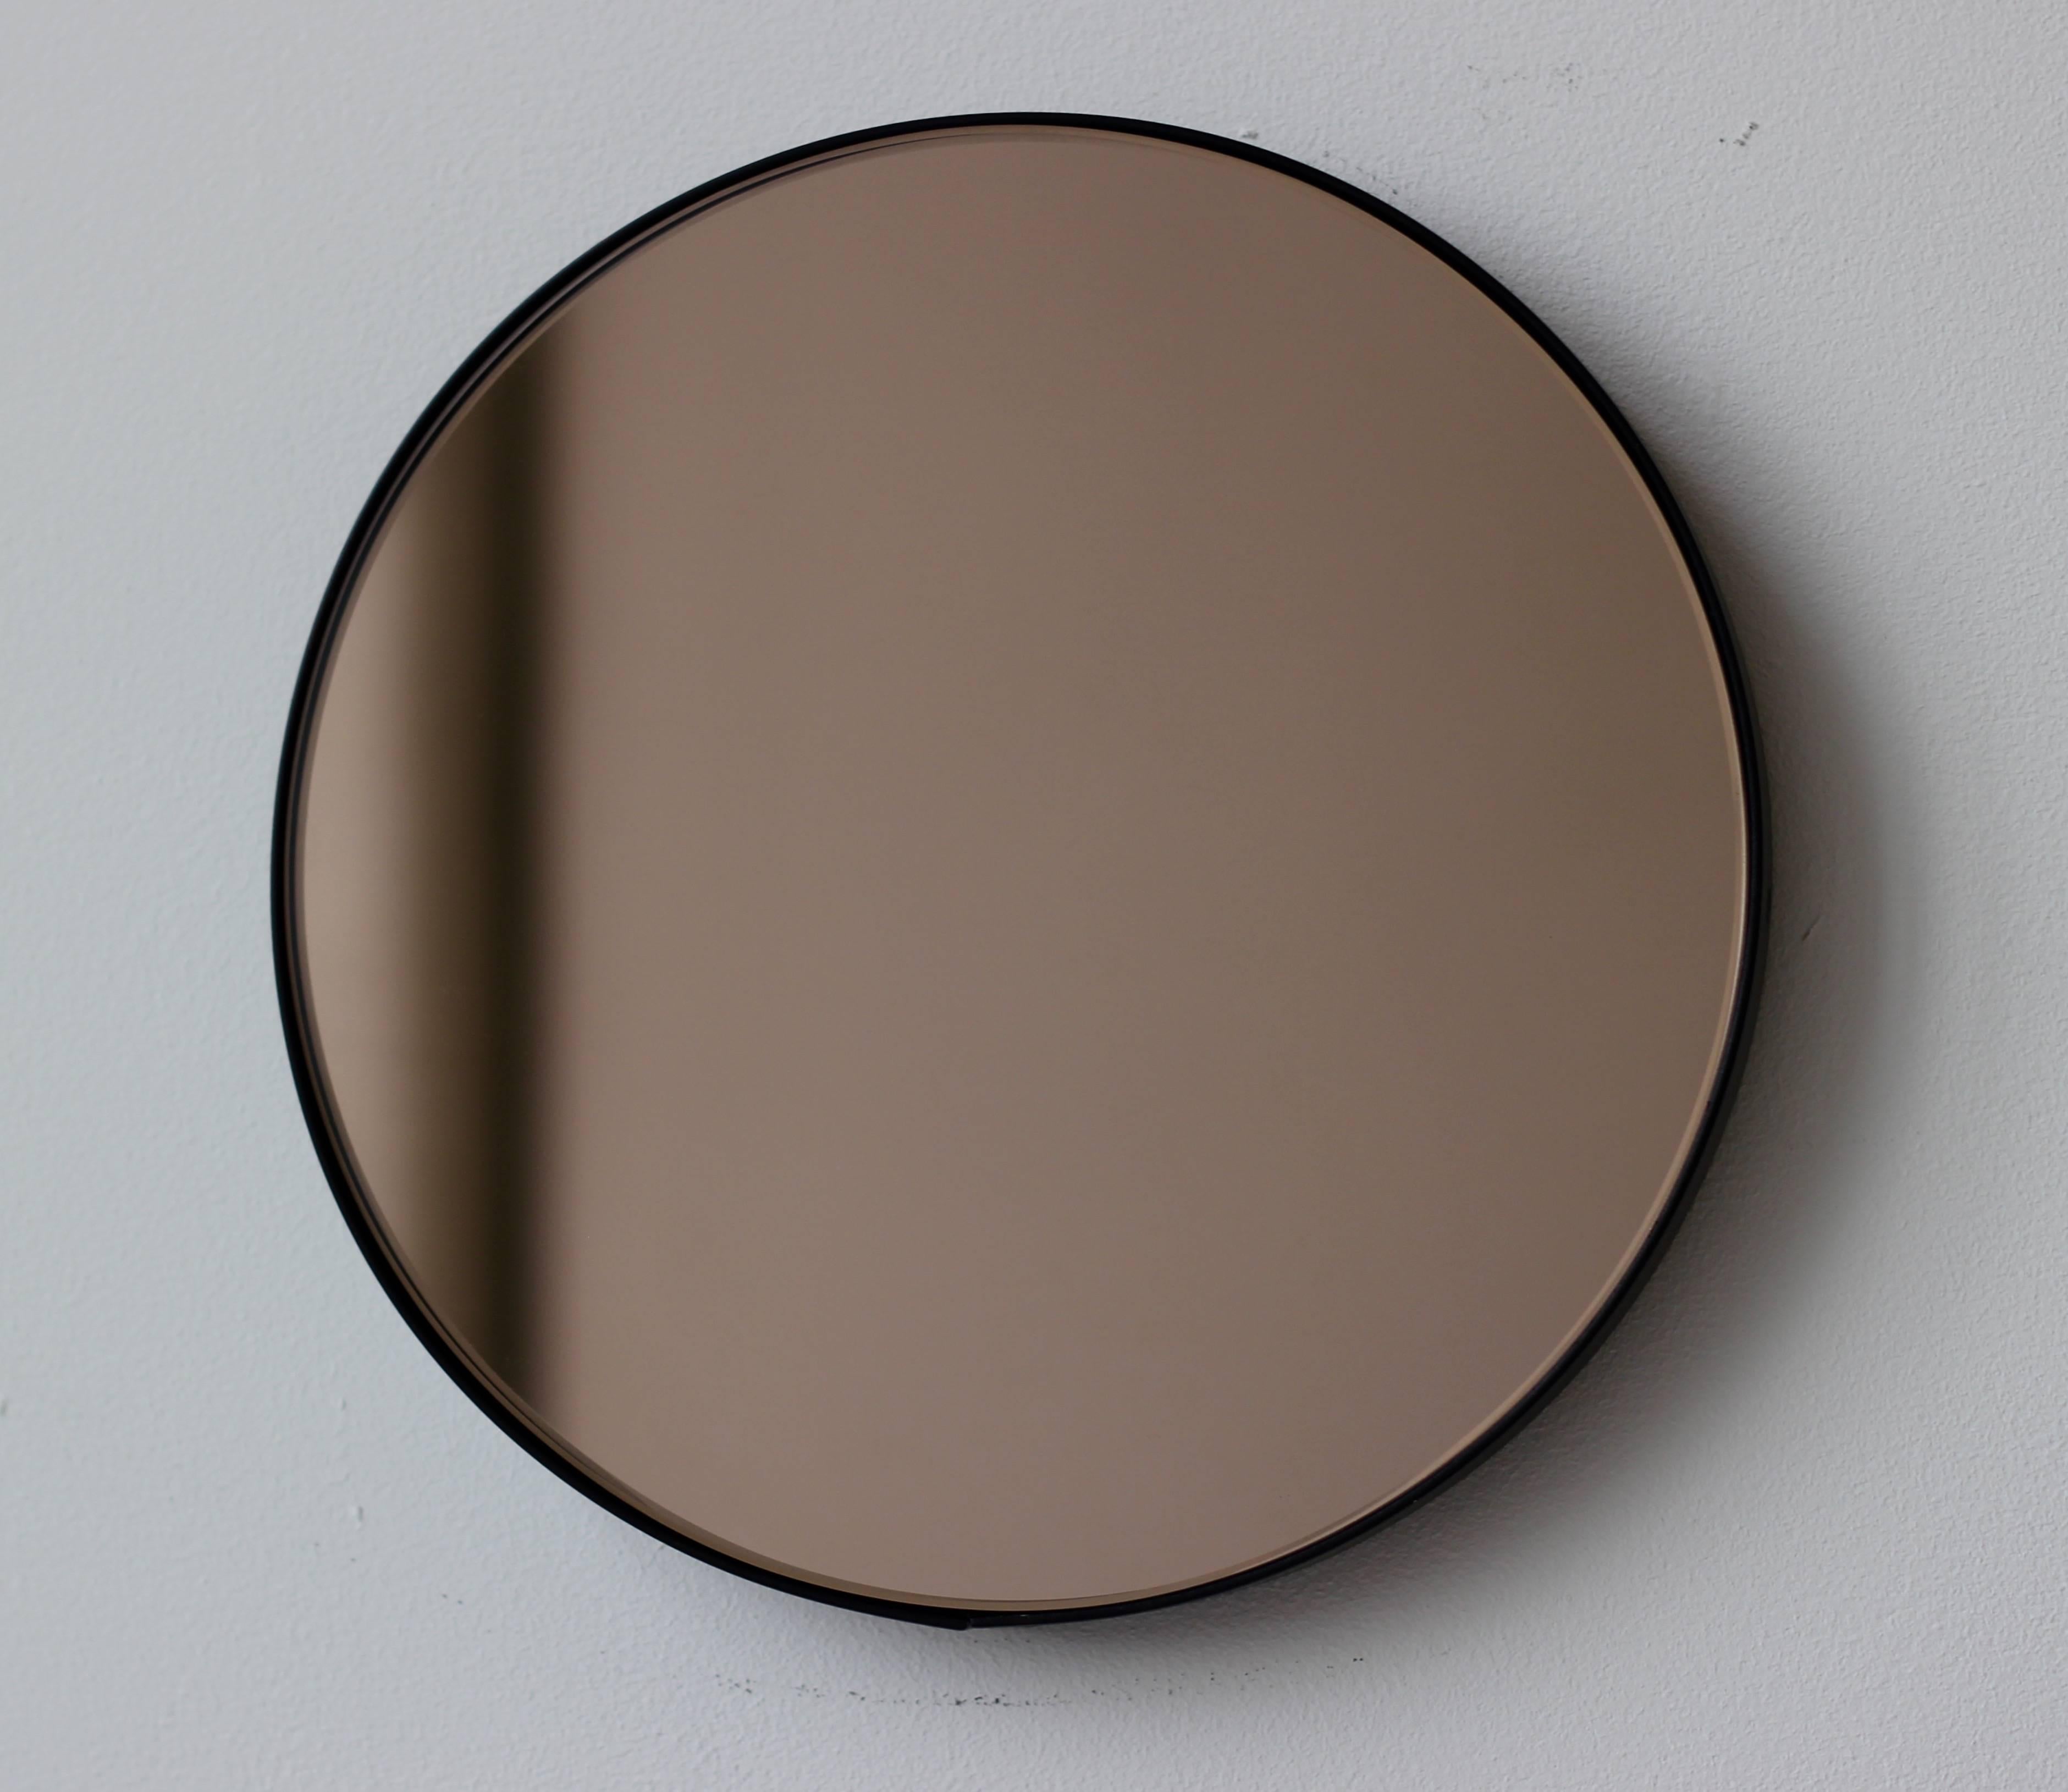 Minimalist bronze tinted round mirror with an elegant black powder coated aluminium frame. Designed and handcrafted in London, UK.

Medium, large and extra-large mirrors (60, 80 and 100cm) are fitted with an ingenious French cleat (split batten)